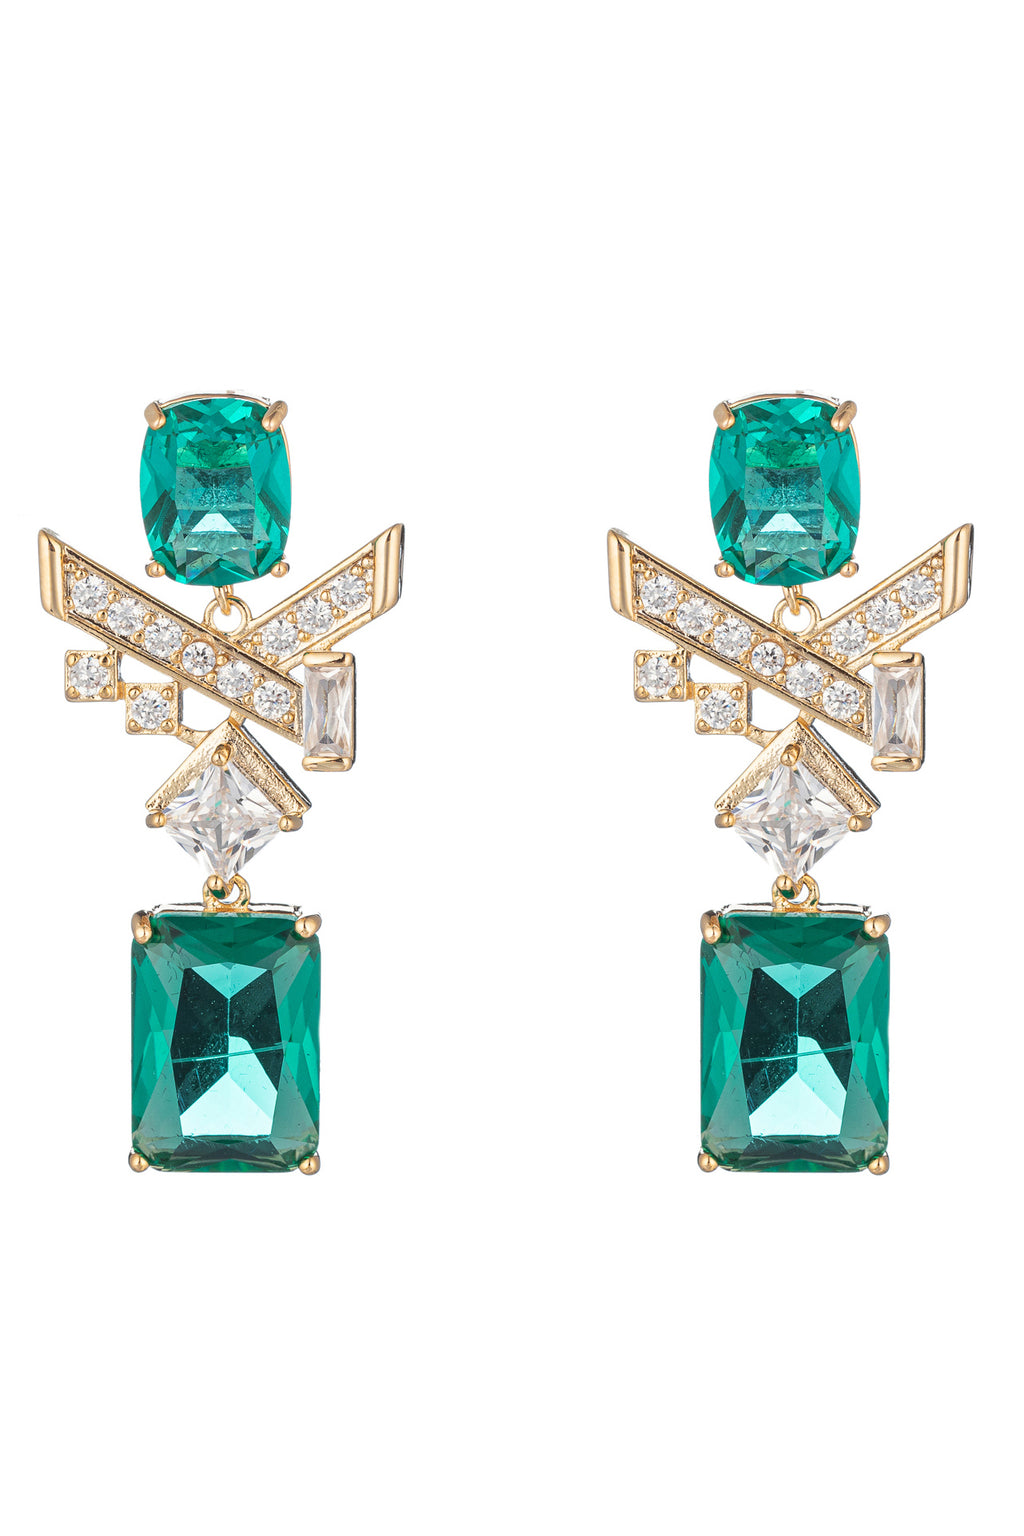 Gold tone brass dangle earrings studded with green CZ crystals.